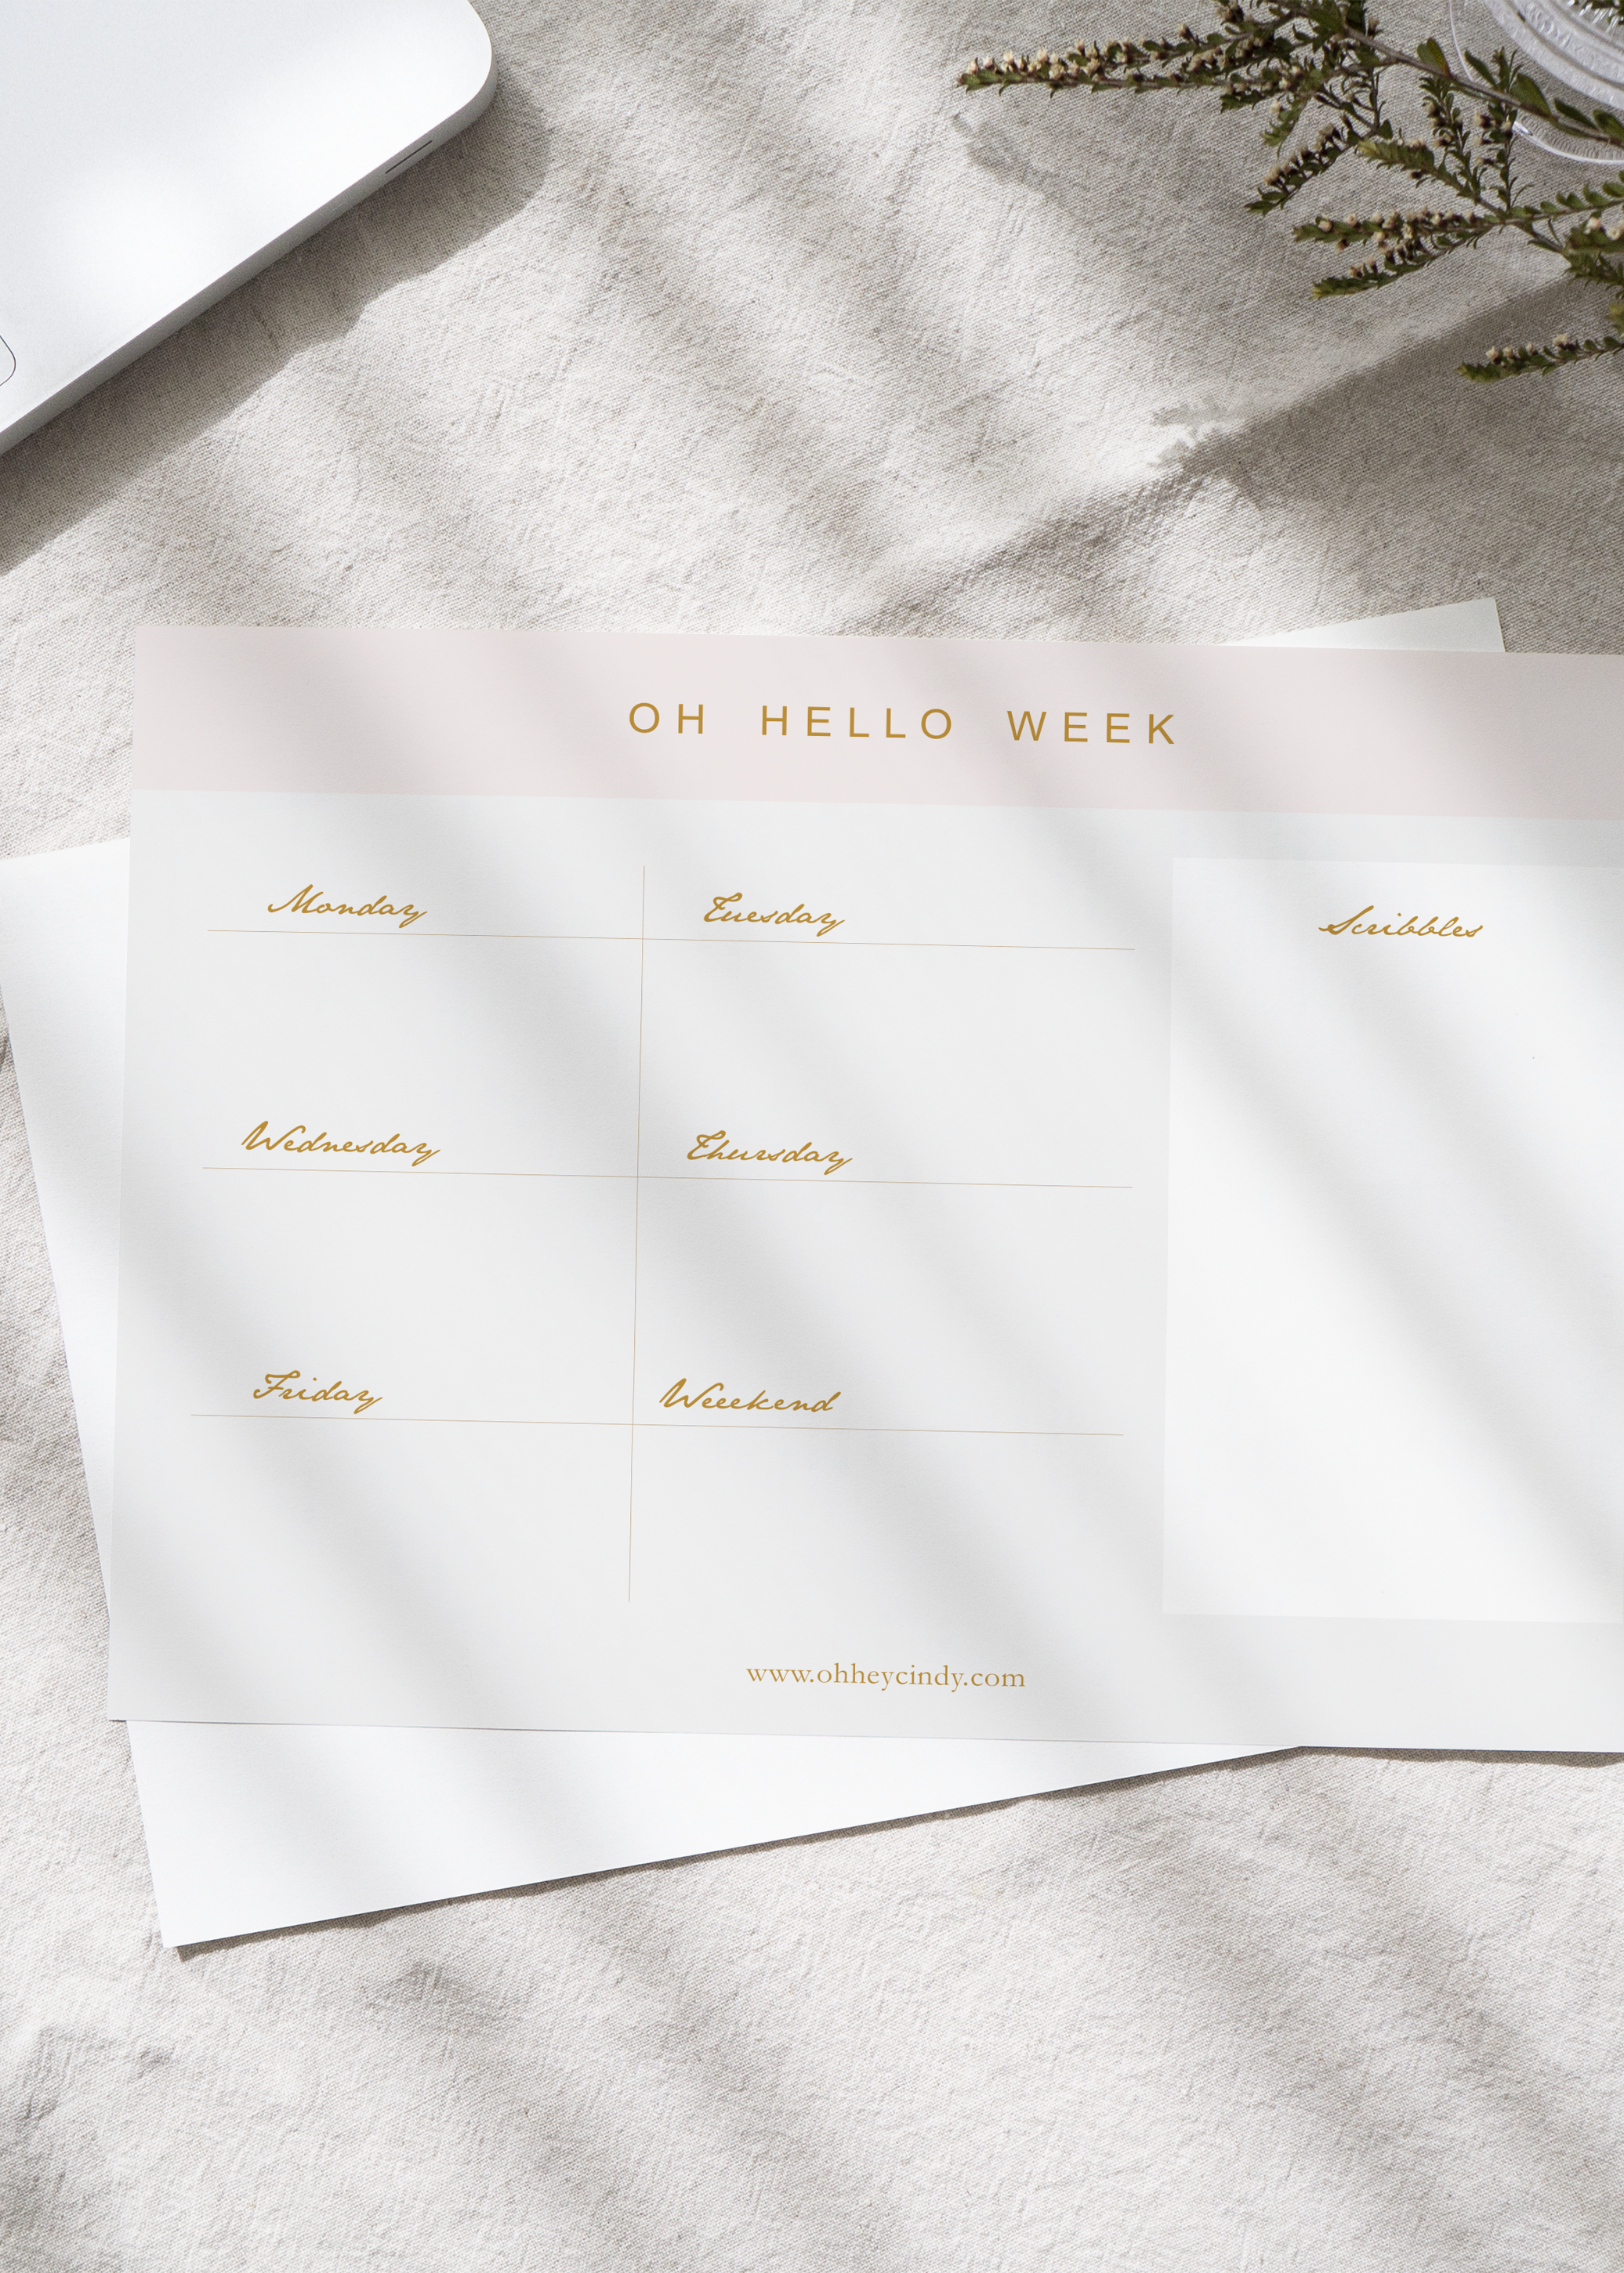 Oh Hello Week - Free Download - Oh Hey Cindy